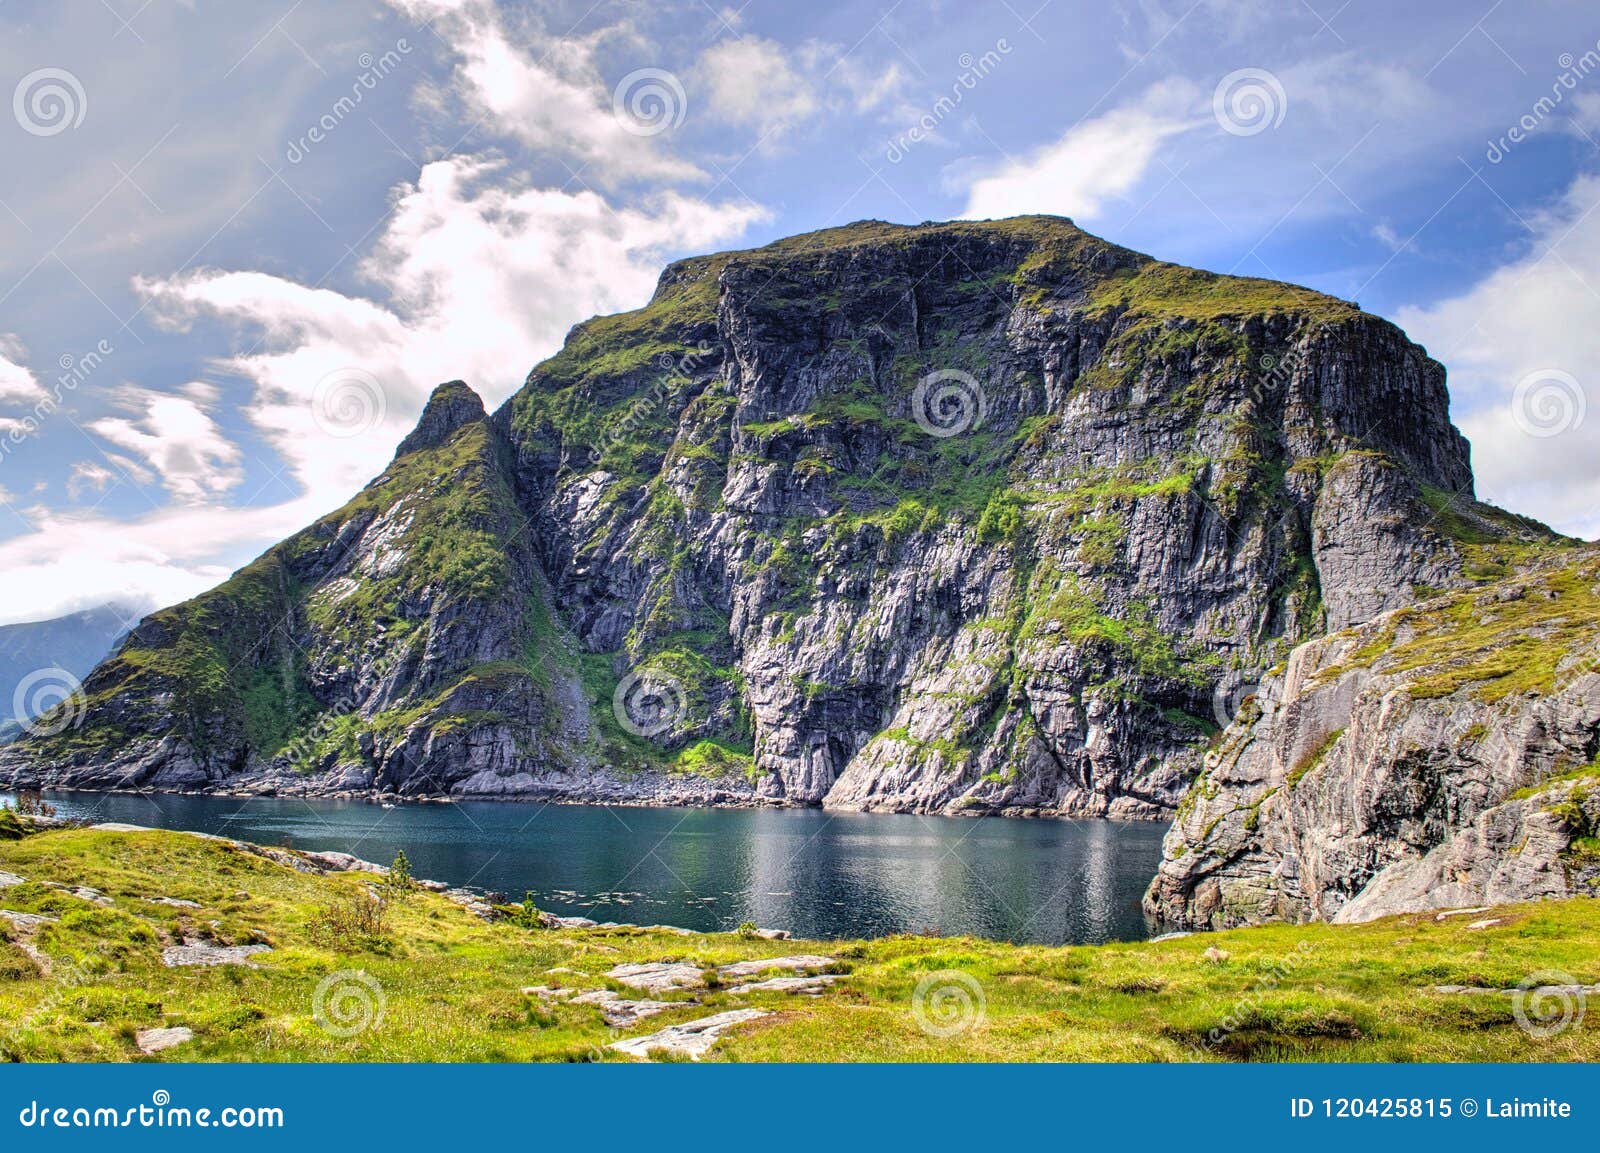 fjords in the municipality of moskenes in the end of the lofoten archipelago, norway